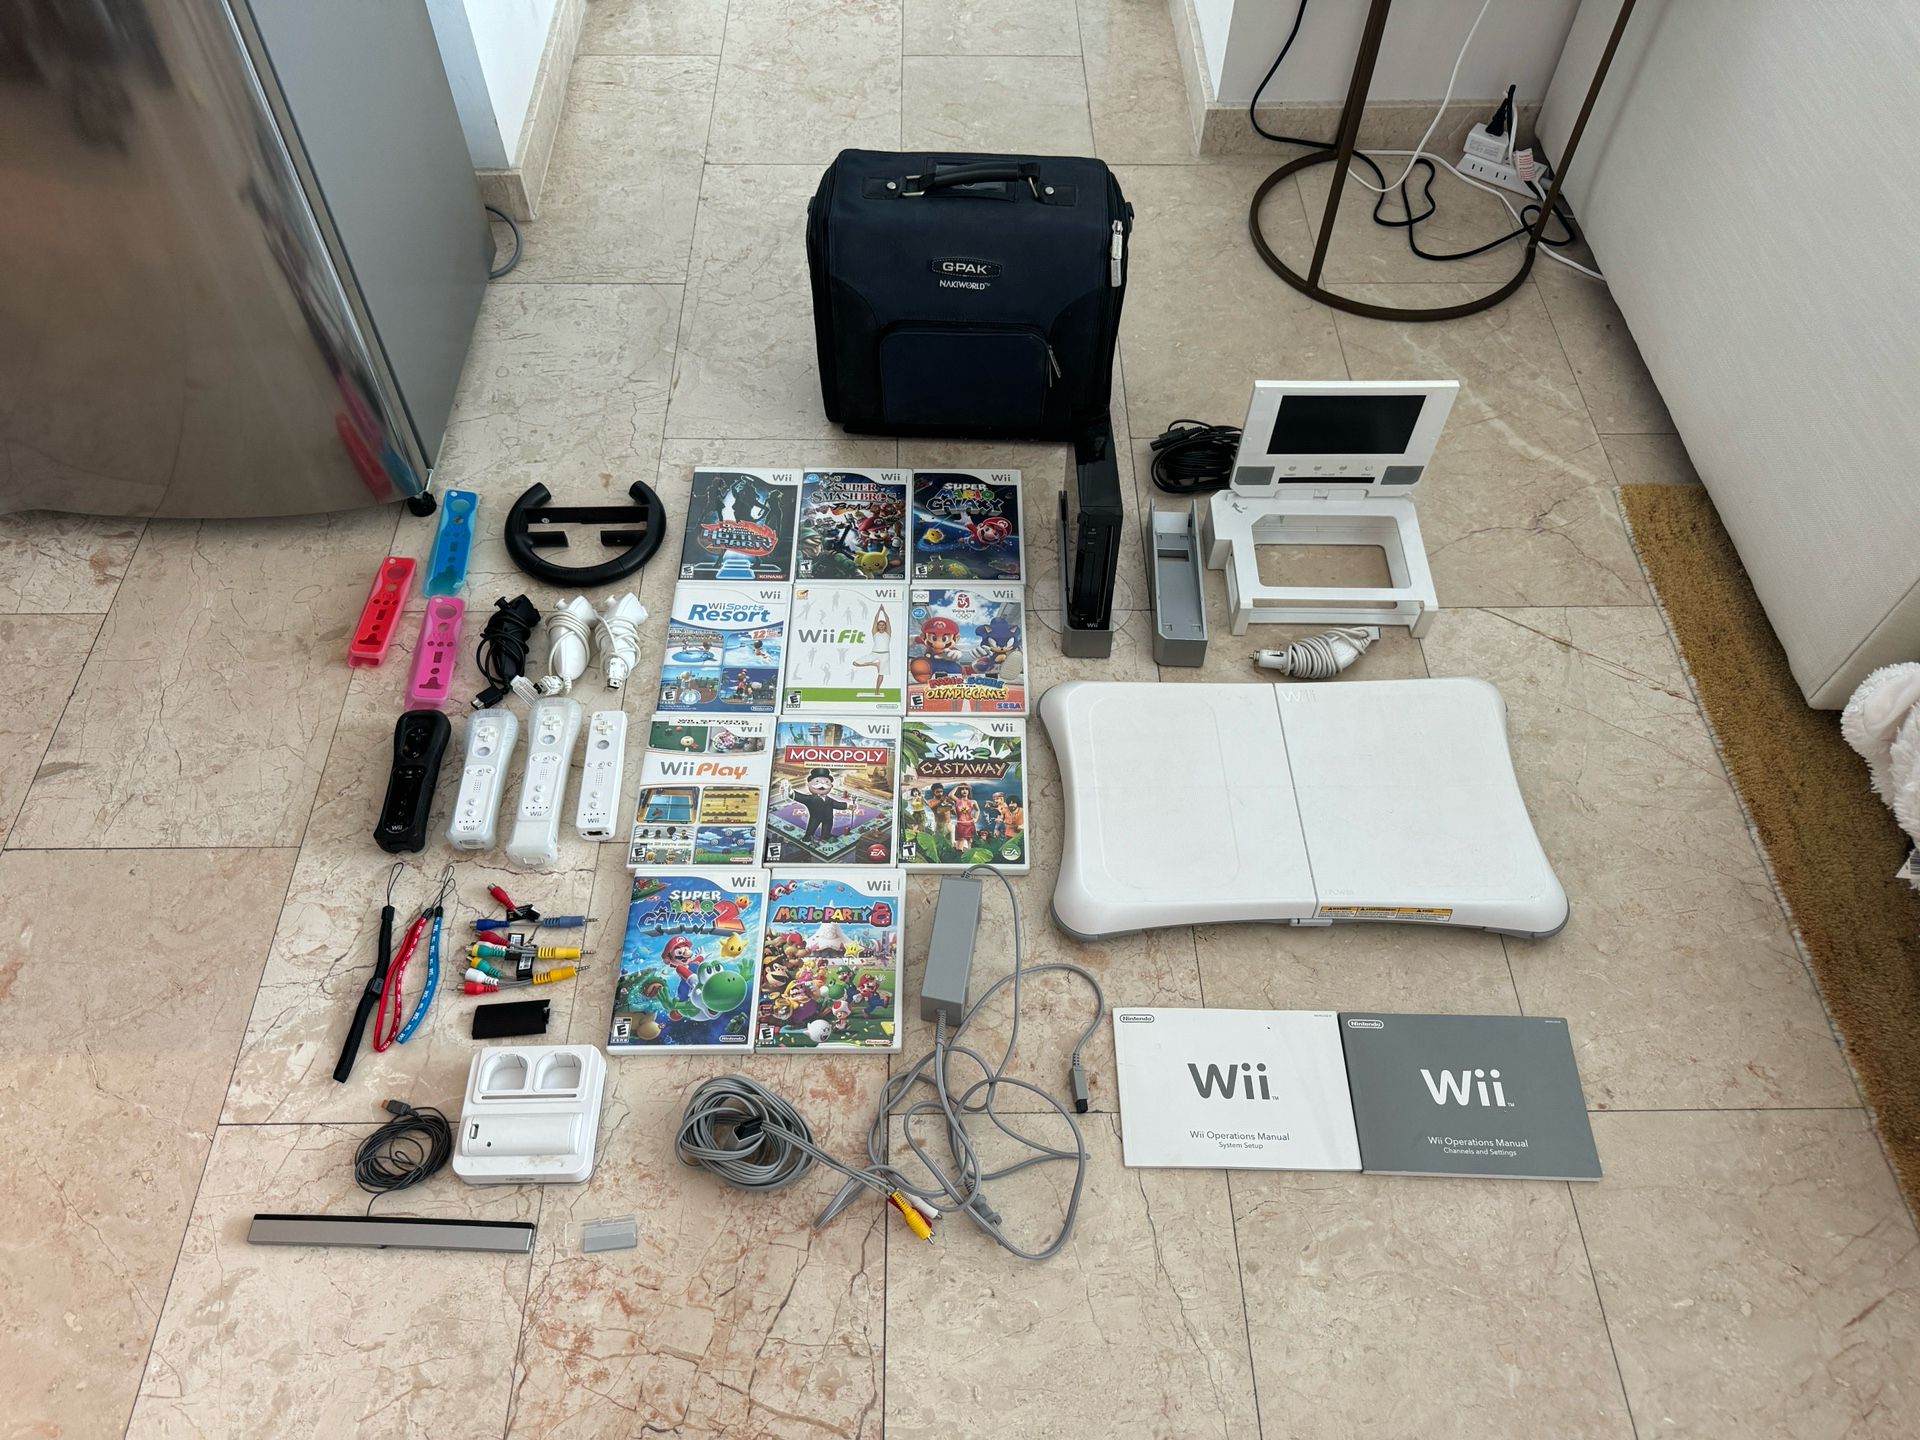 Nintendo Wii Bundle With 11 Games, Wii Fit, Travel Screen, 4 Remotes, 3 Nunchuks, And Rechargeable Remotes